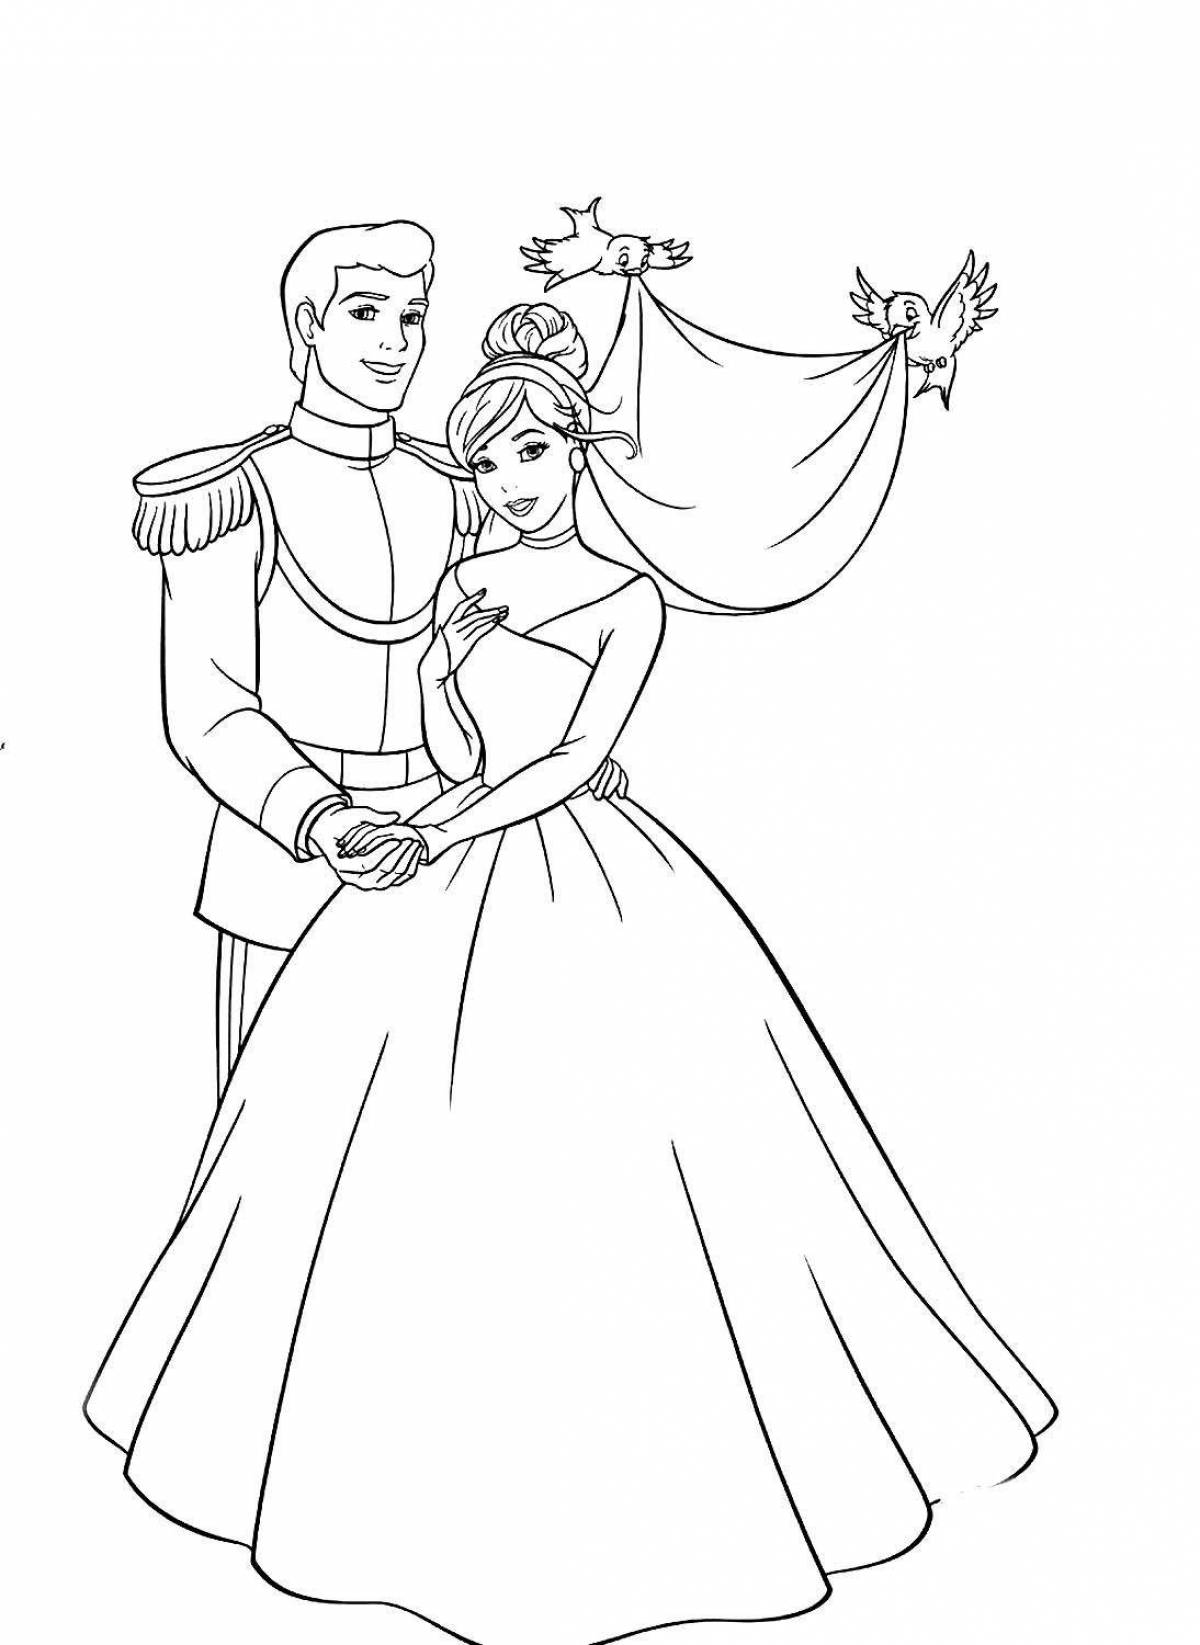 Generous prince and princess coloring page